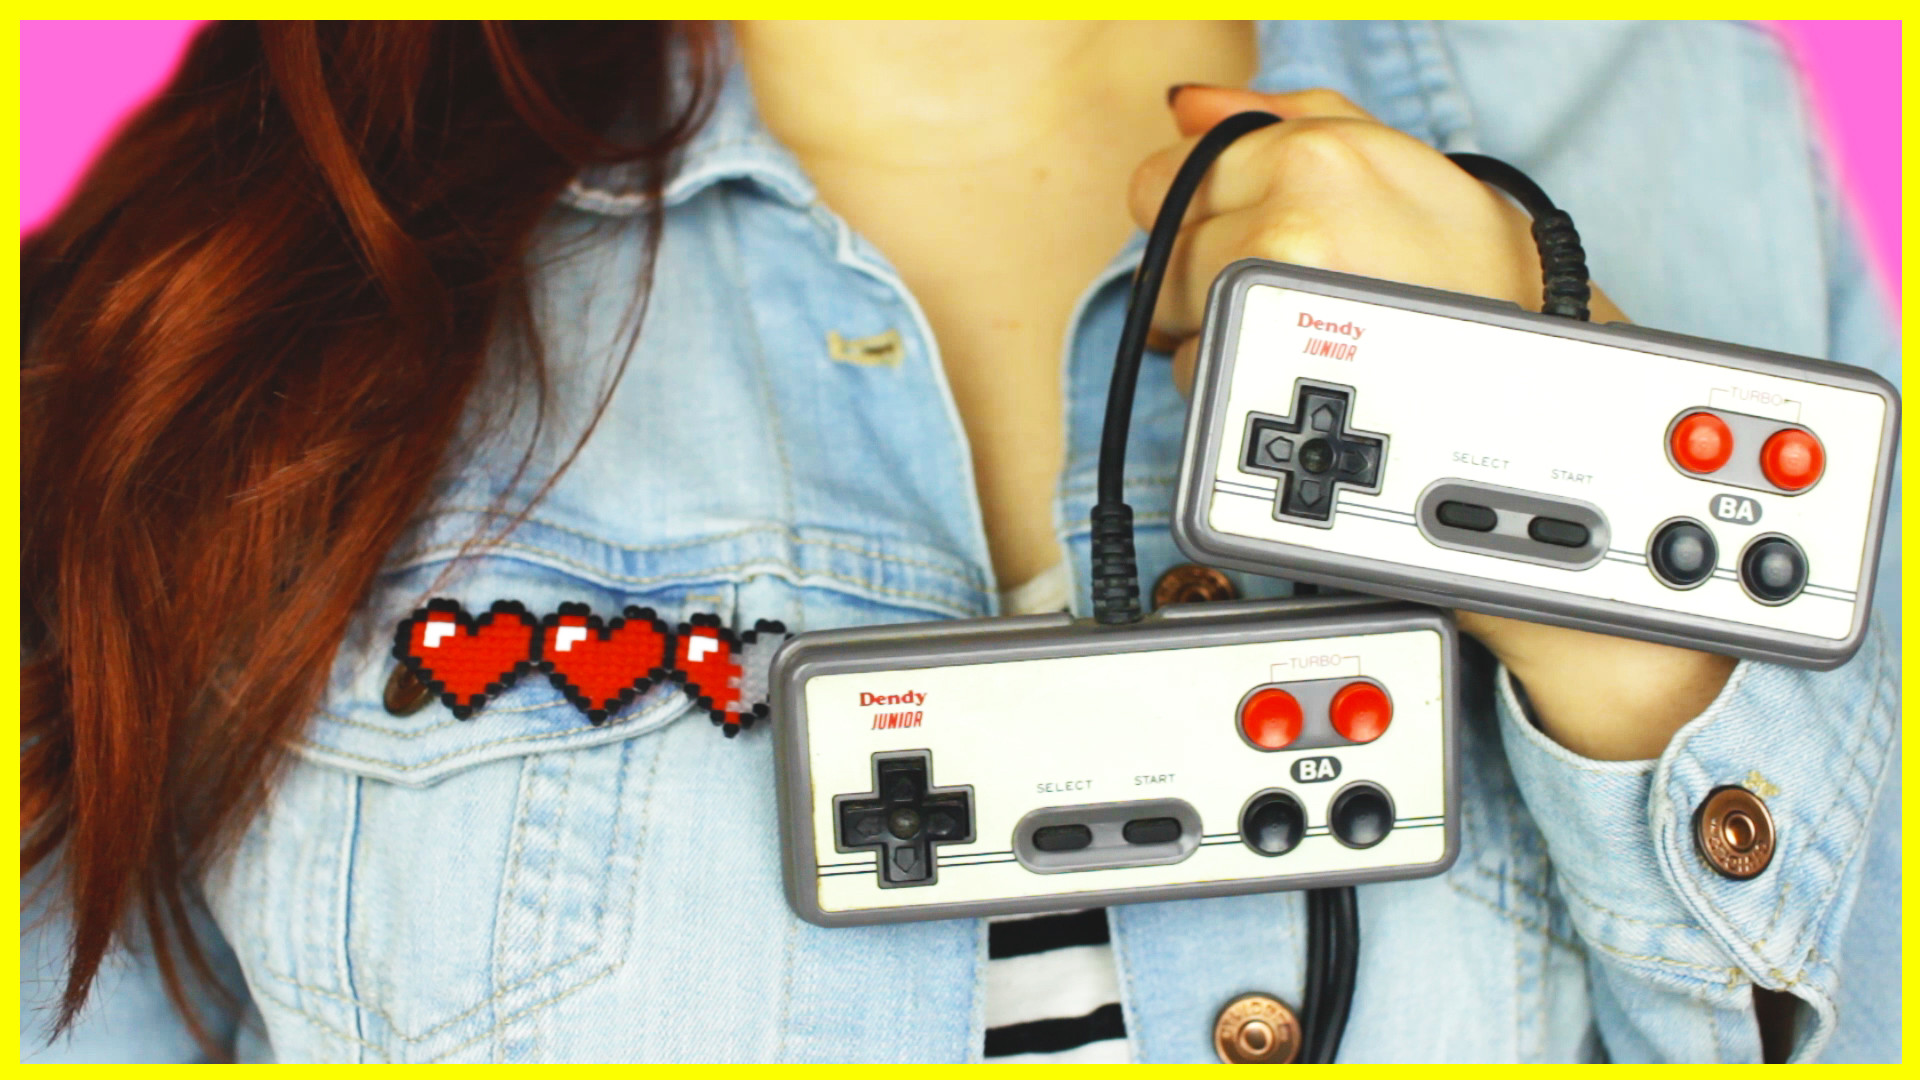 Gift Ideas For Gamer Boyfriend
 Awesome DIY Gift Ideas For Gamers & Geeks Makoccino